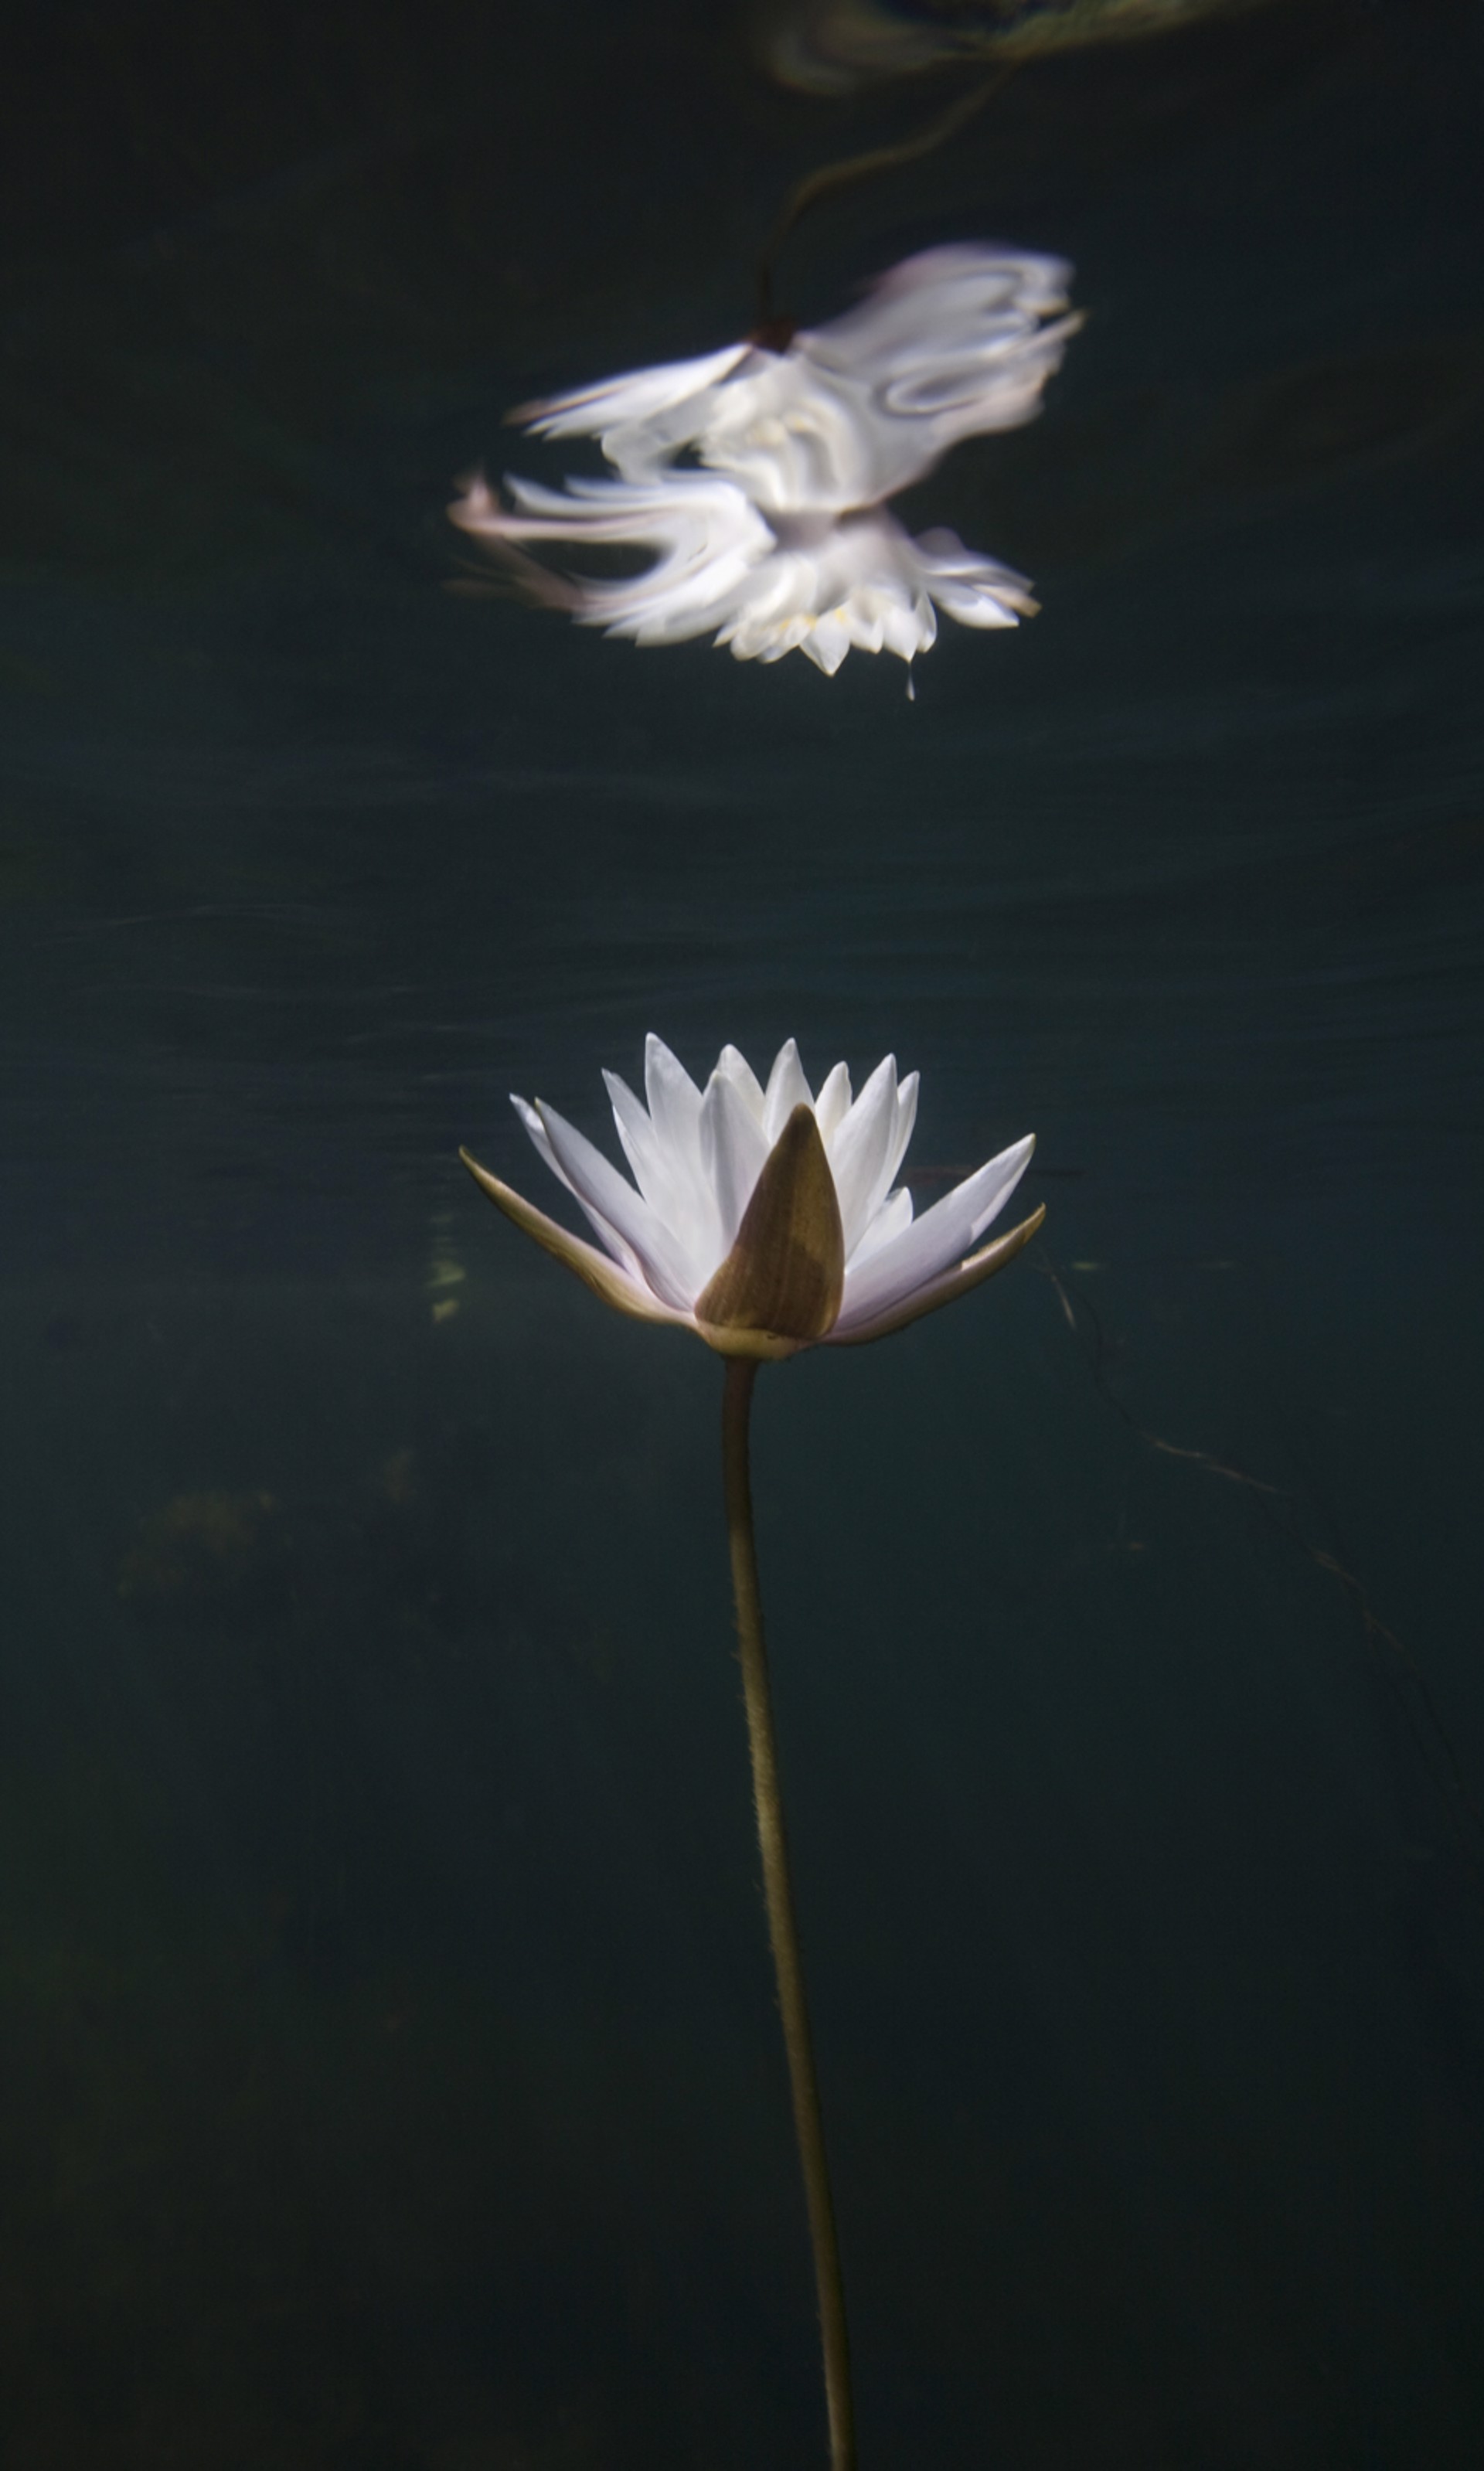 WATER LILY STUDY No 19 by WILLIAM SCULLY